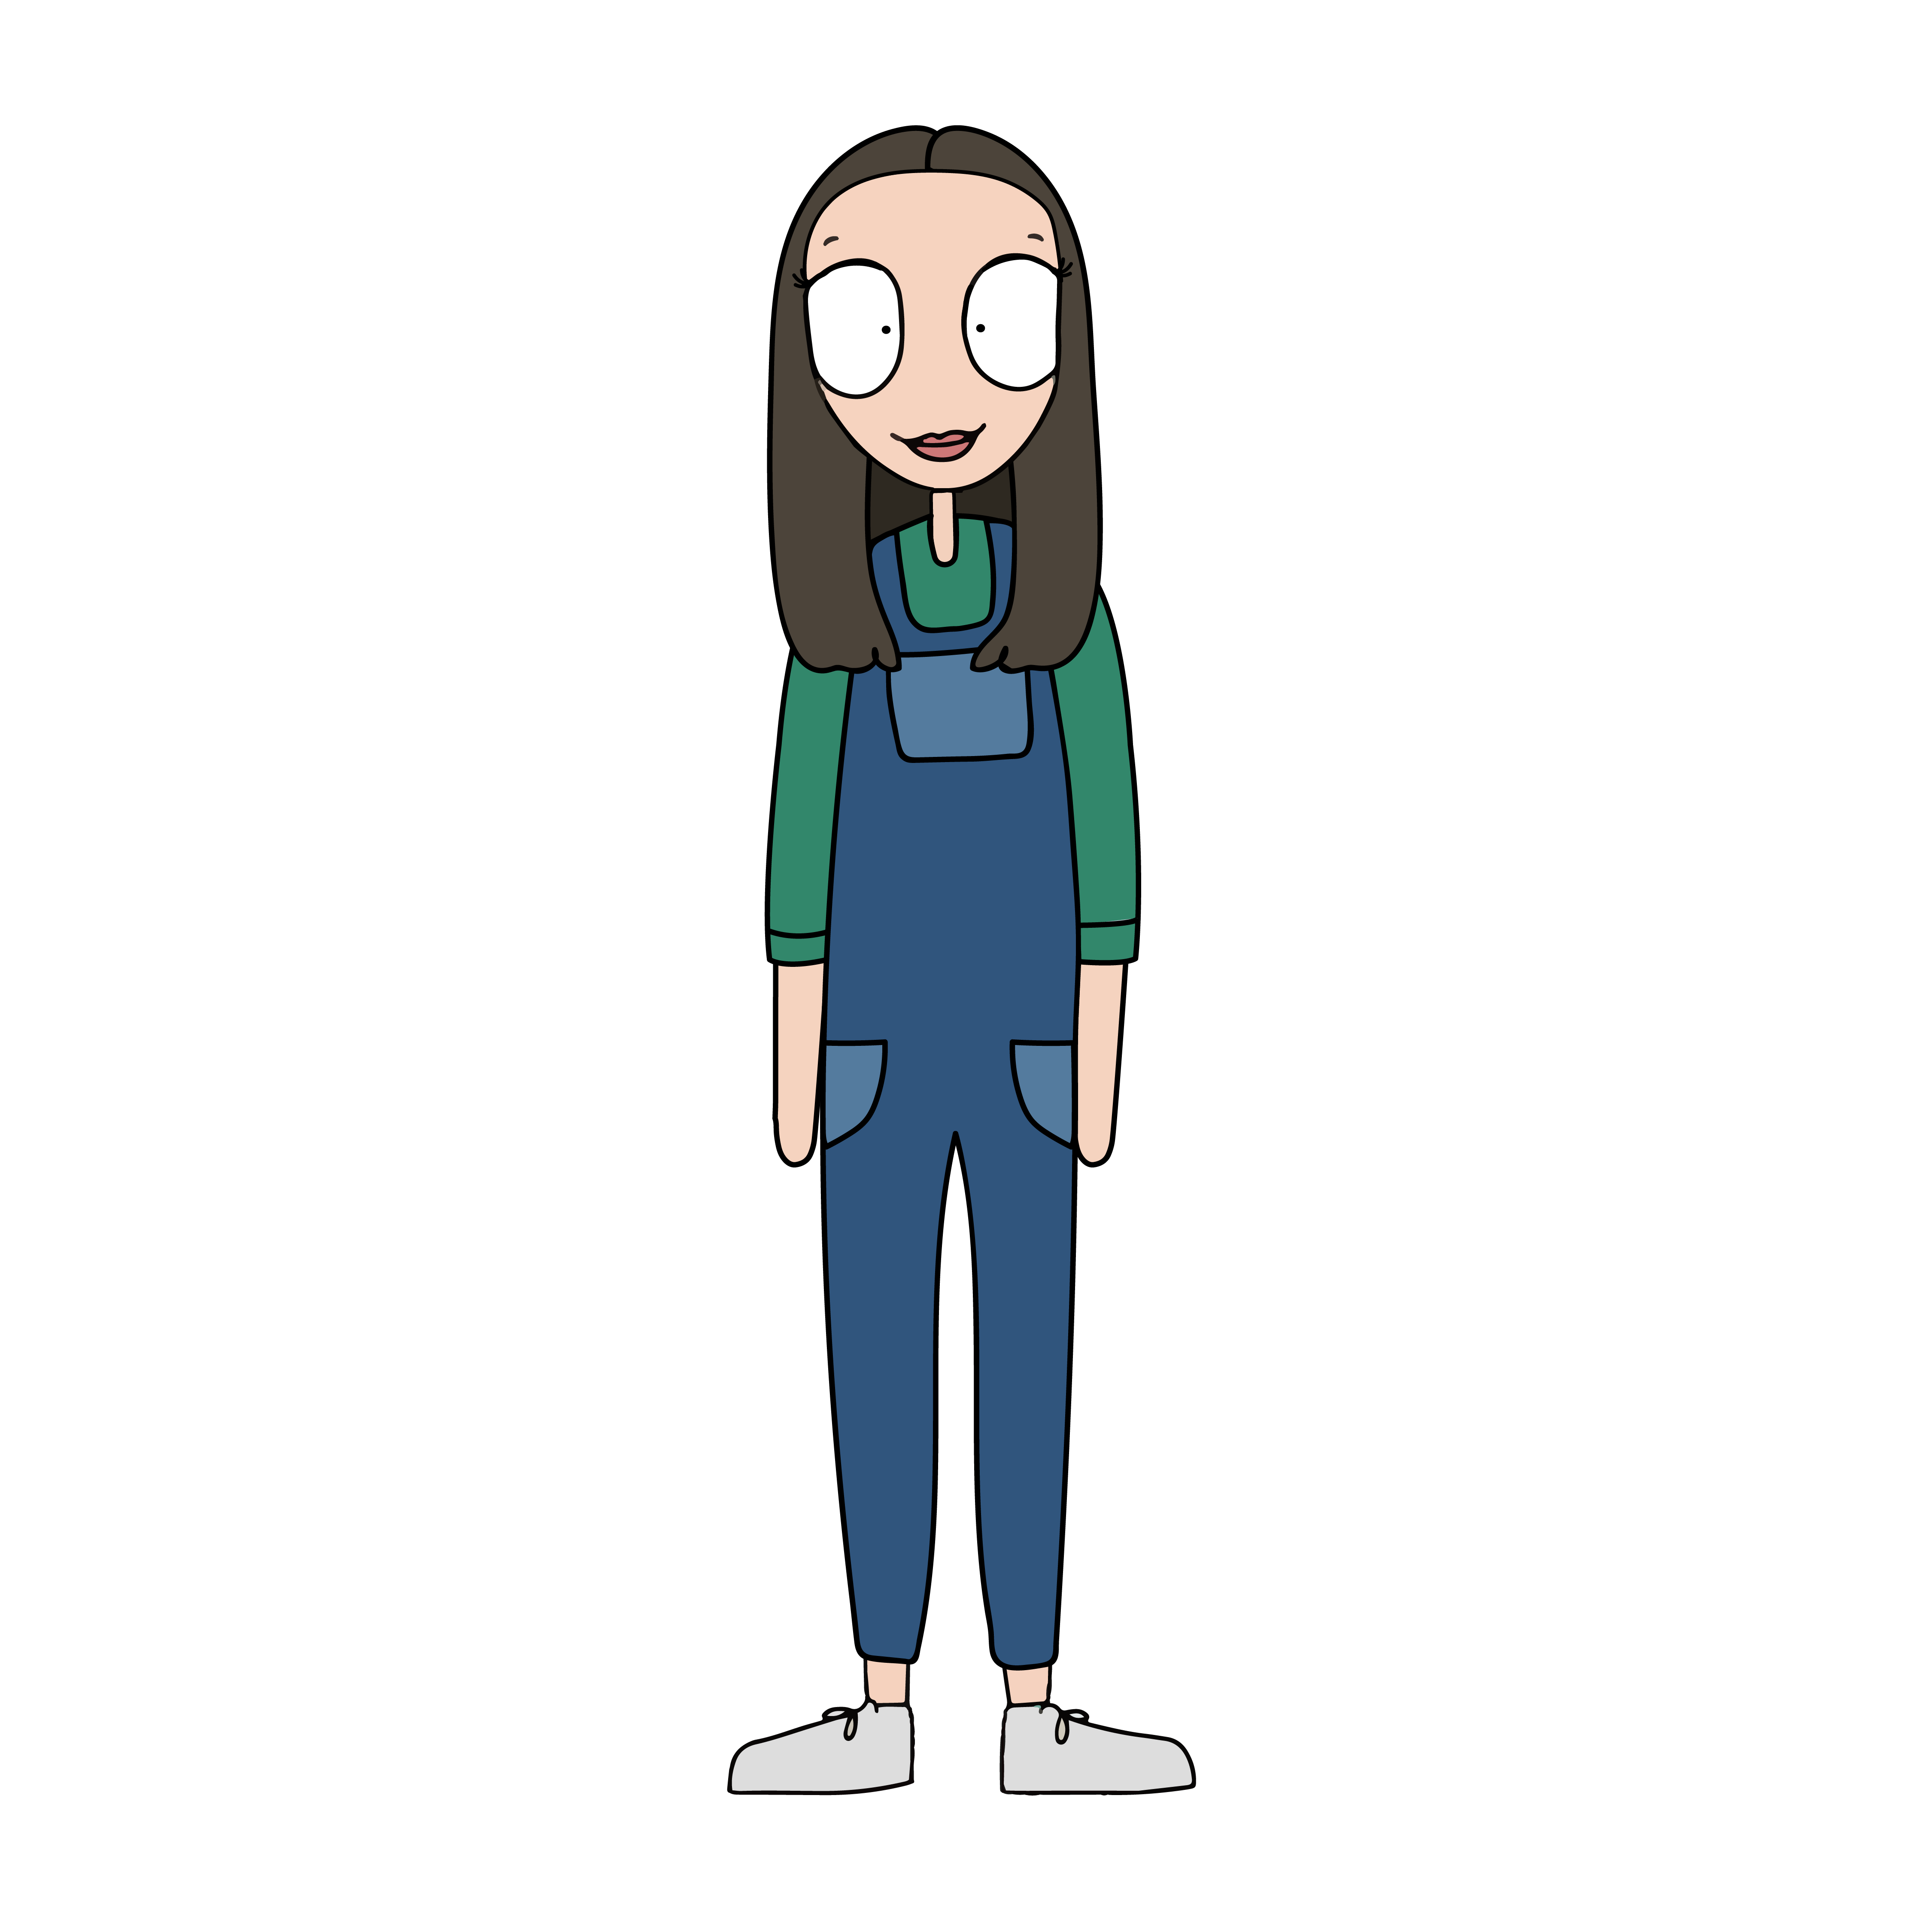 Simple illustration of a white woman with brown hair wearing a green top and blue dungarees